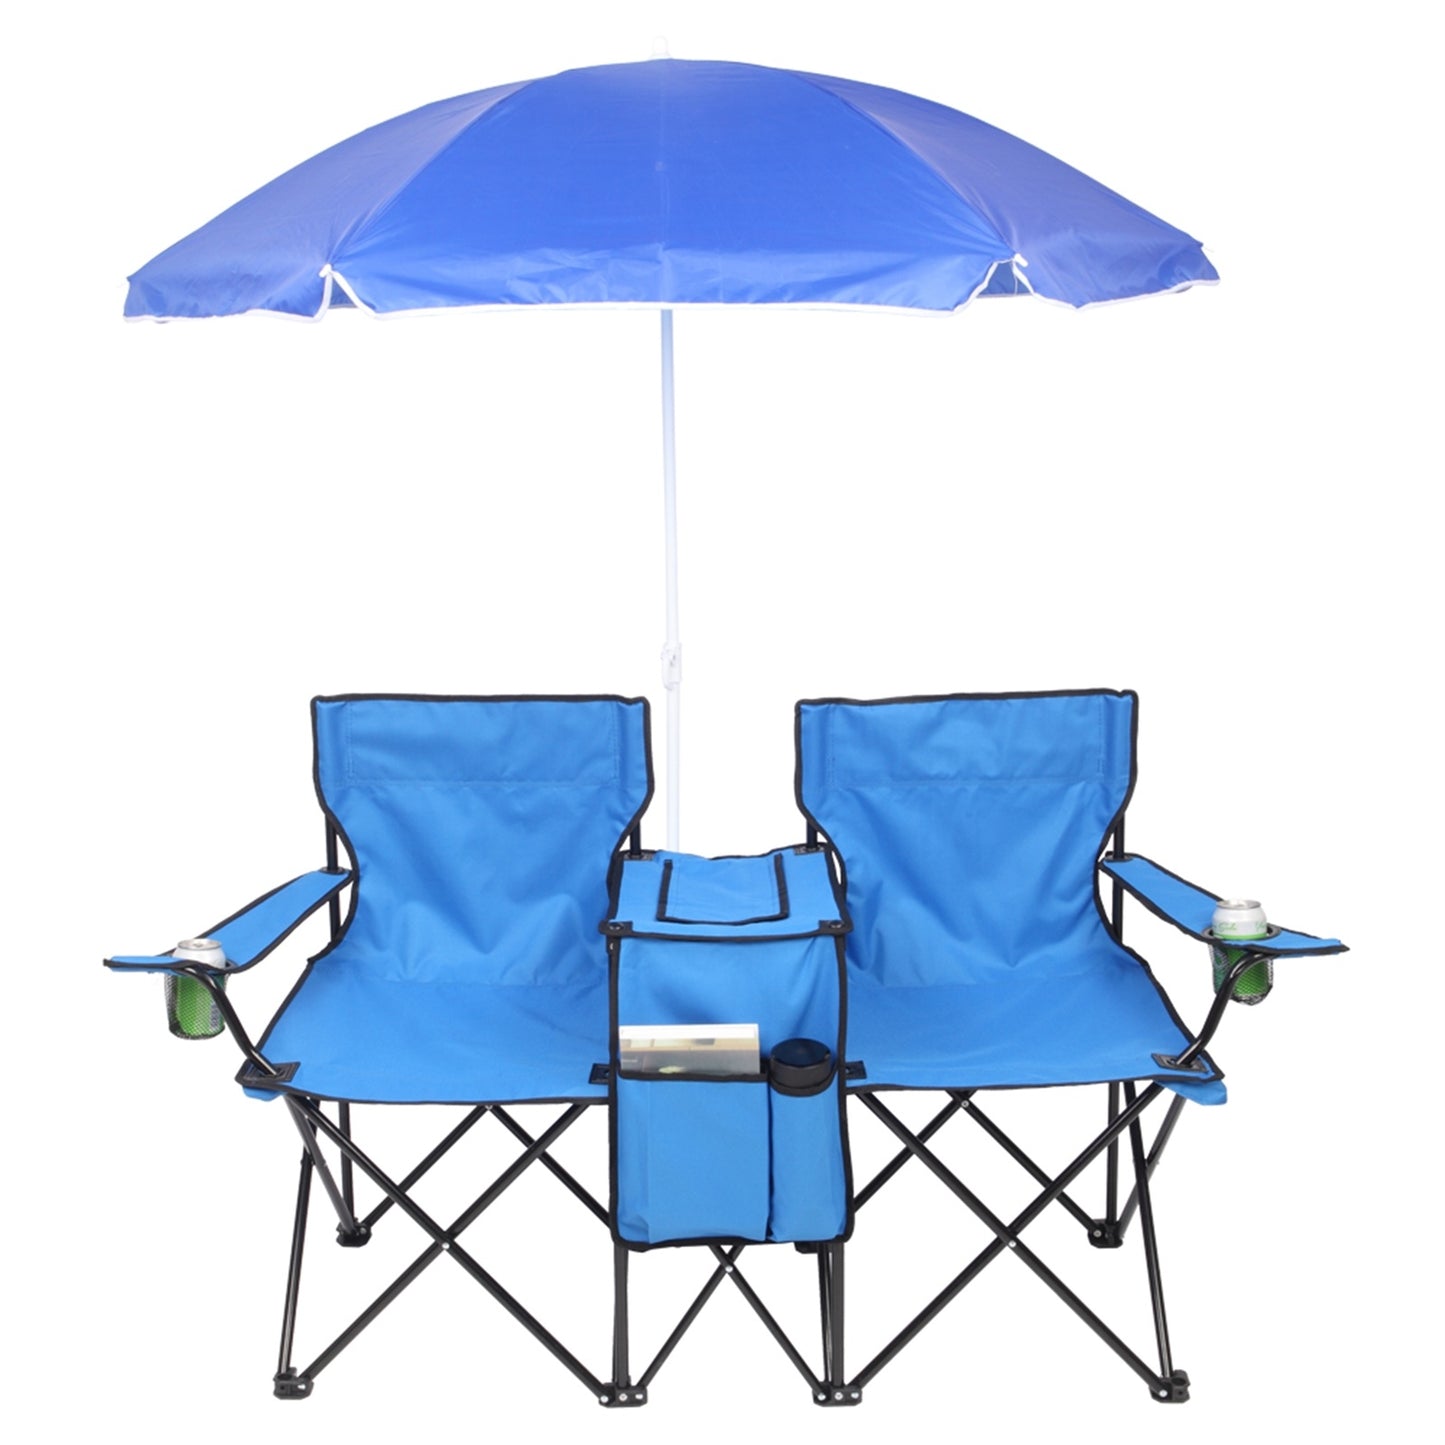 Double Folding Picnic Chairs w/Umbrella Mini Table Beverage Holder Carrying Bag